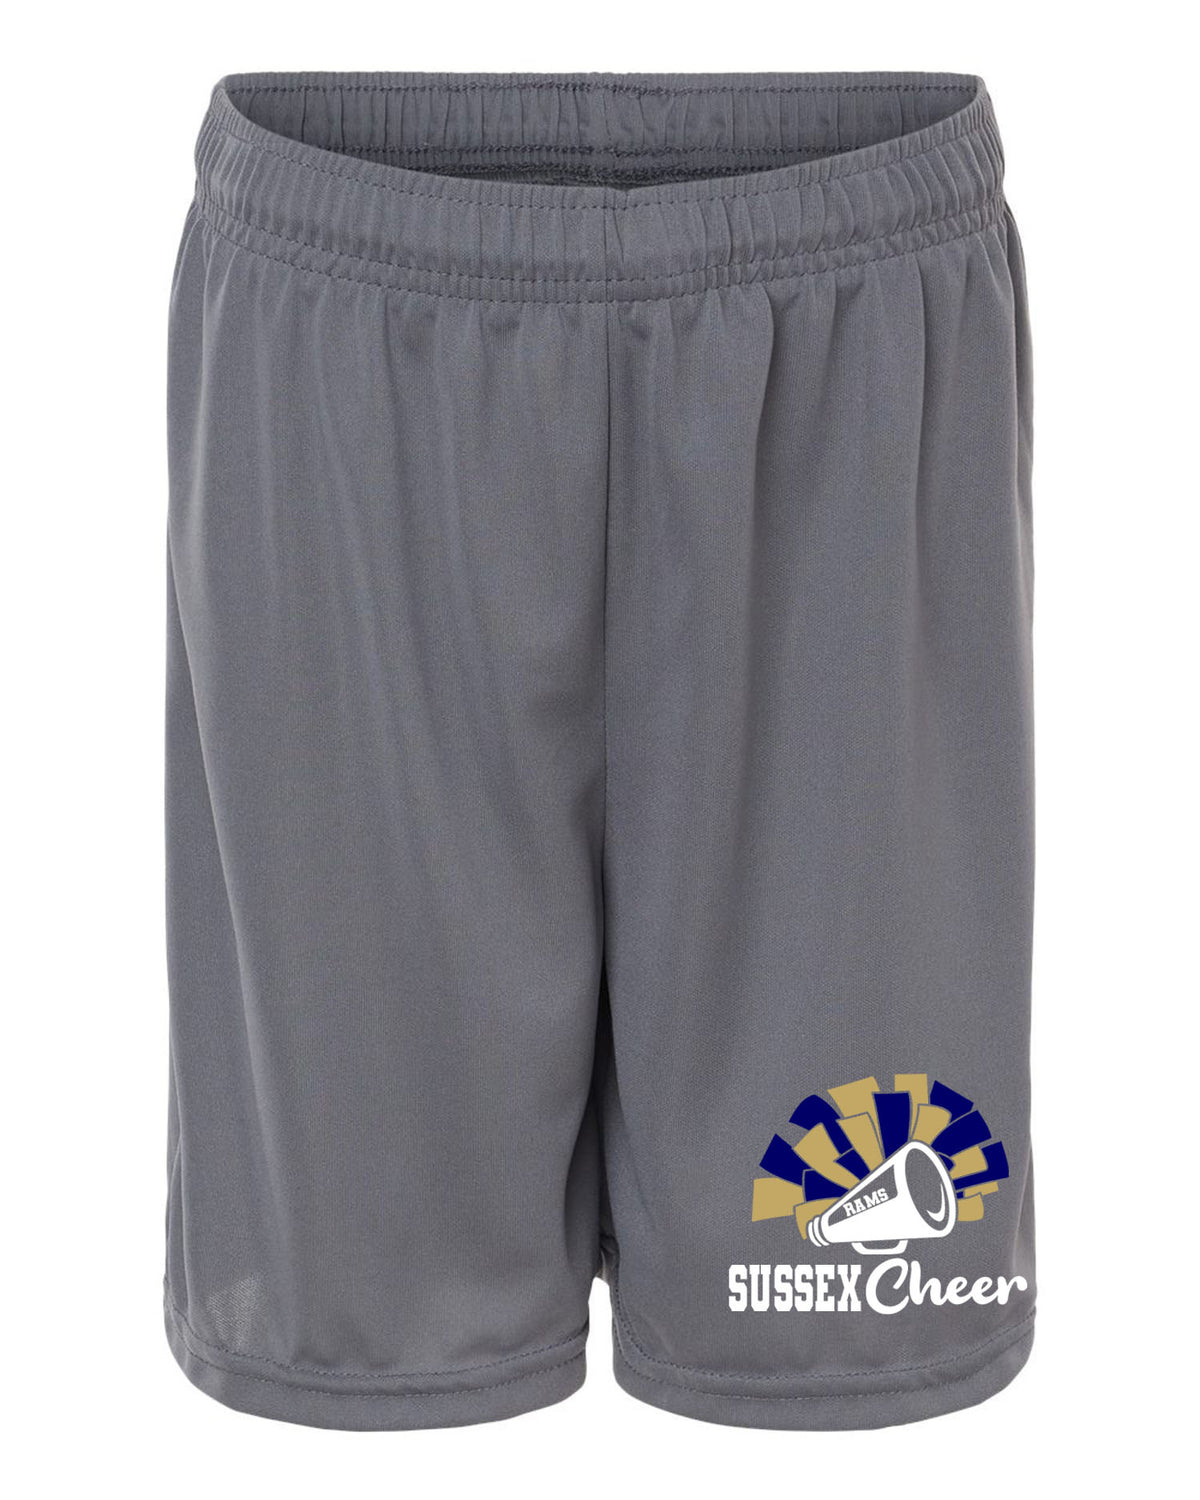 Sussex Middle Cheer Performance Shorts Design 2